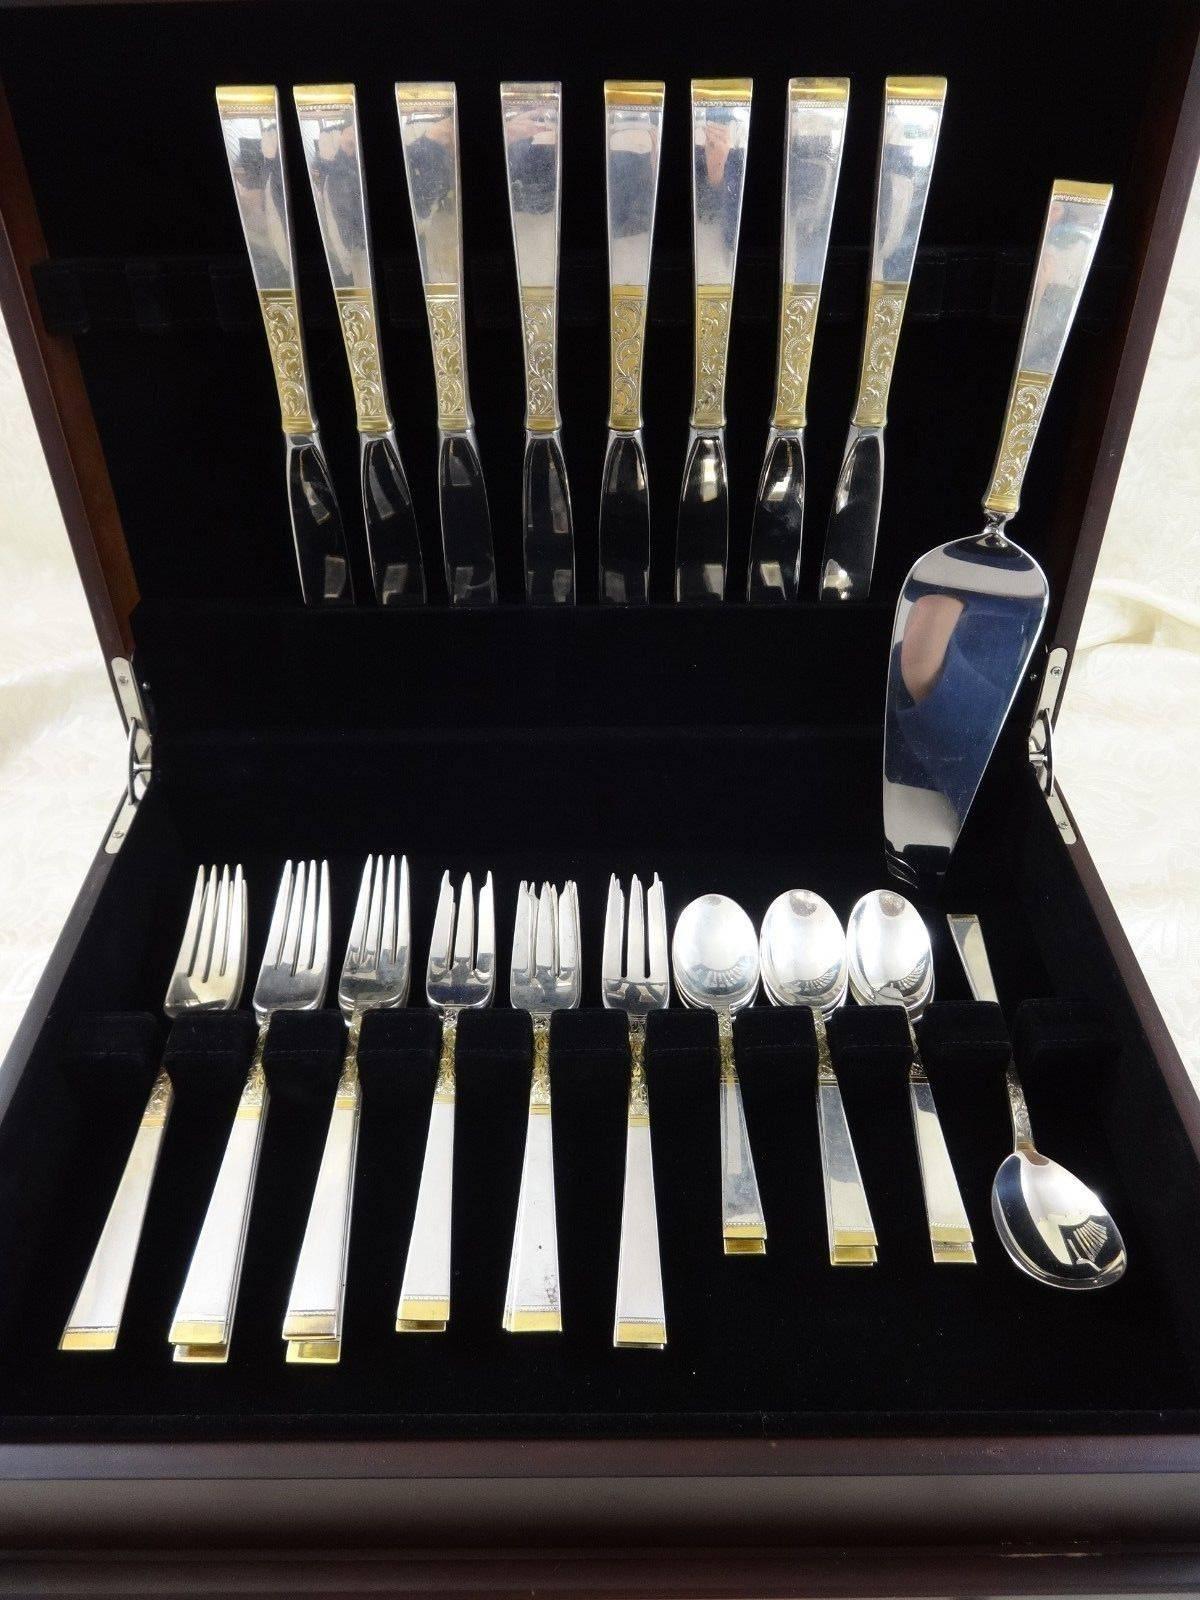 Beautiful Golden Scroll by Gorham sterling silver flatware set of 34 pieces. This set includes:

Eight place size knives, 9 1/8